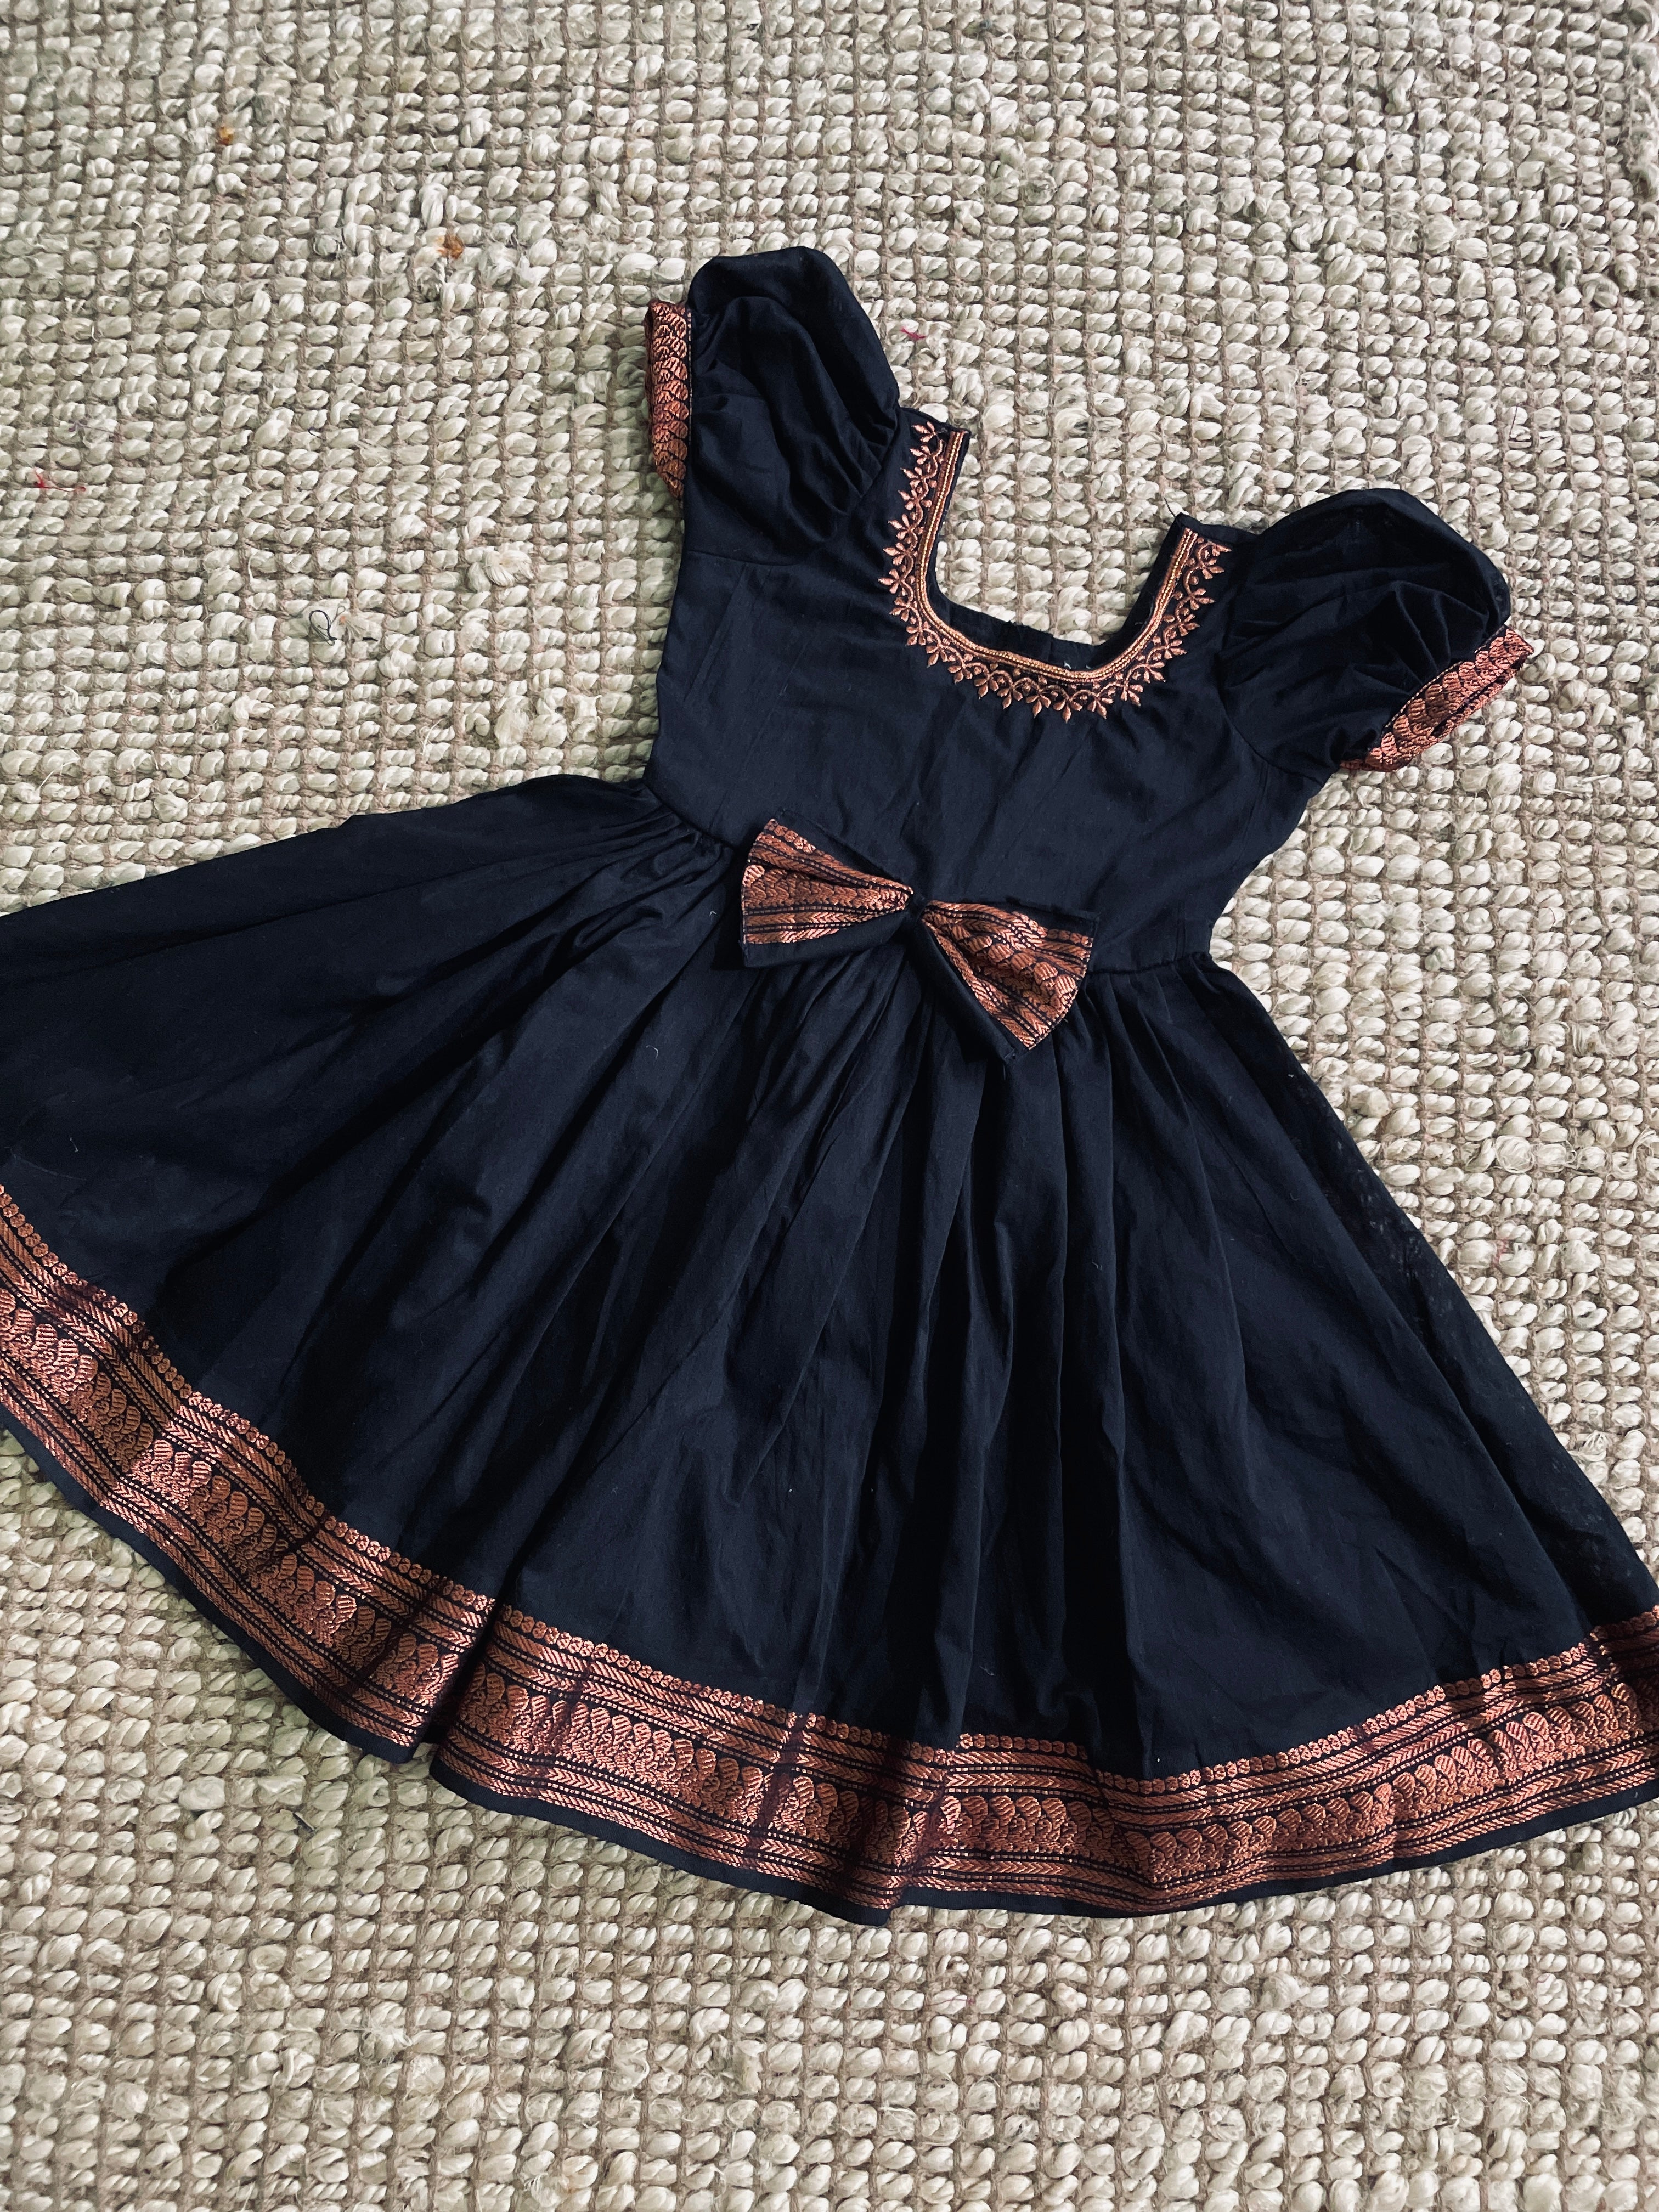 Cute Baby Little Princess in Black Dress : Amazon.in: Home & Kitchen